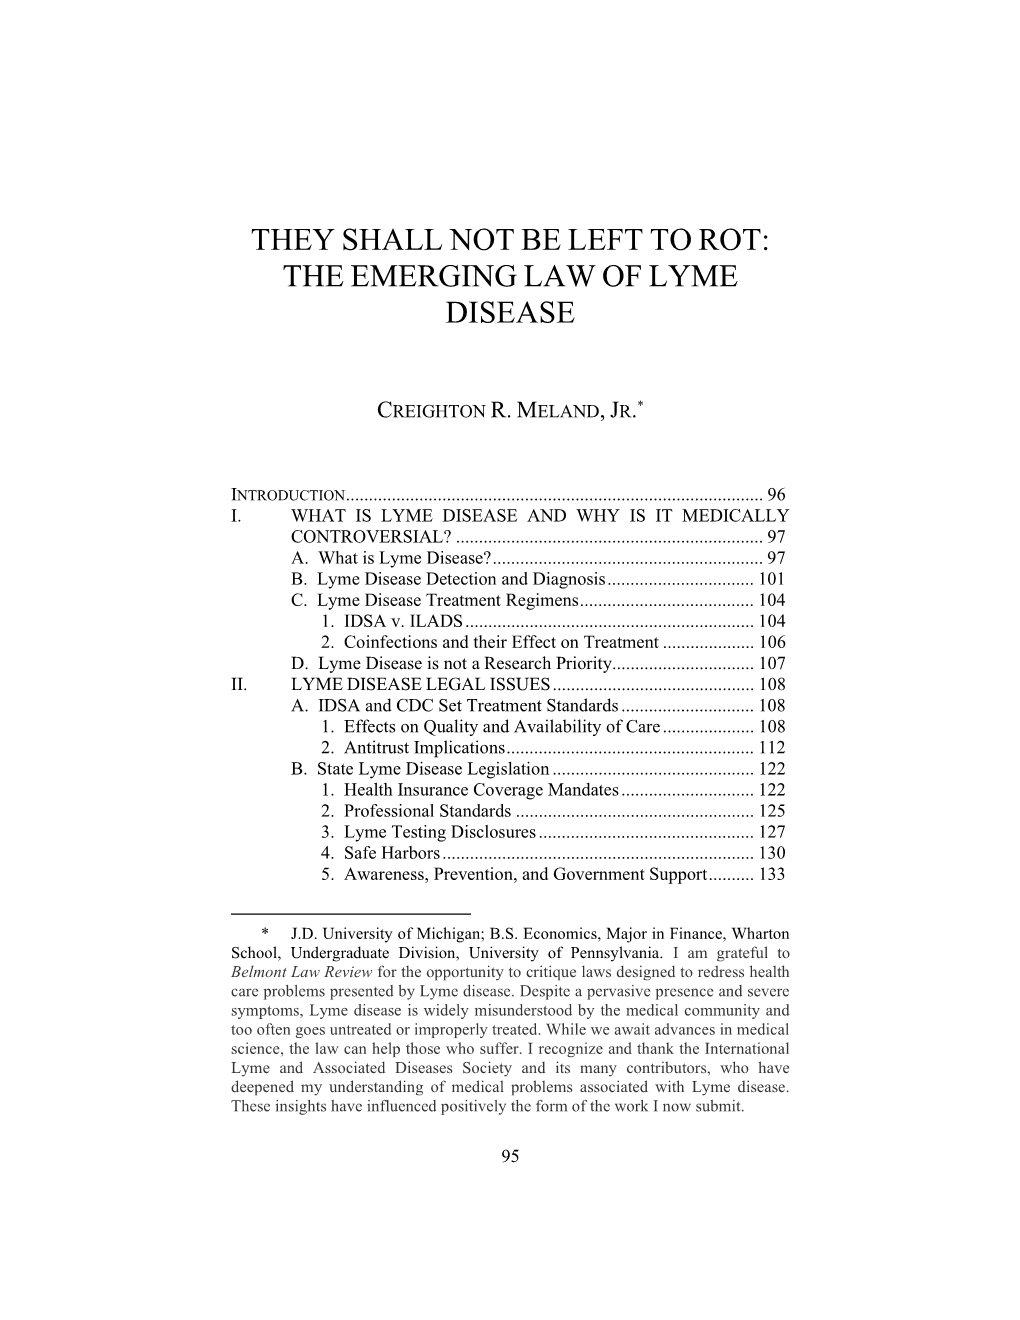 They Shall Not Be Left to Rot: the Emerging Law of Lyme Disease